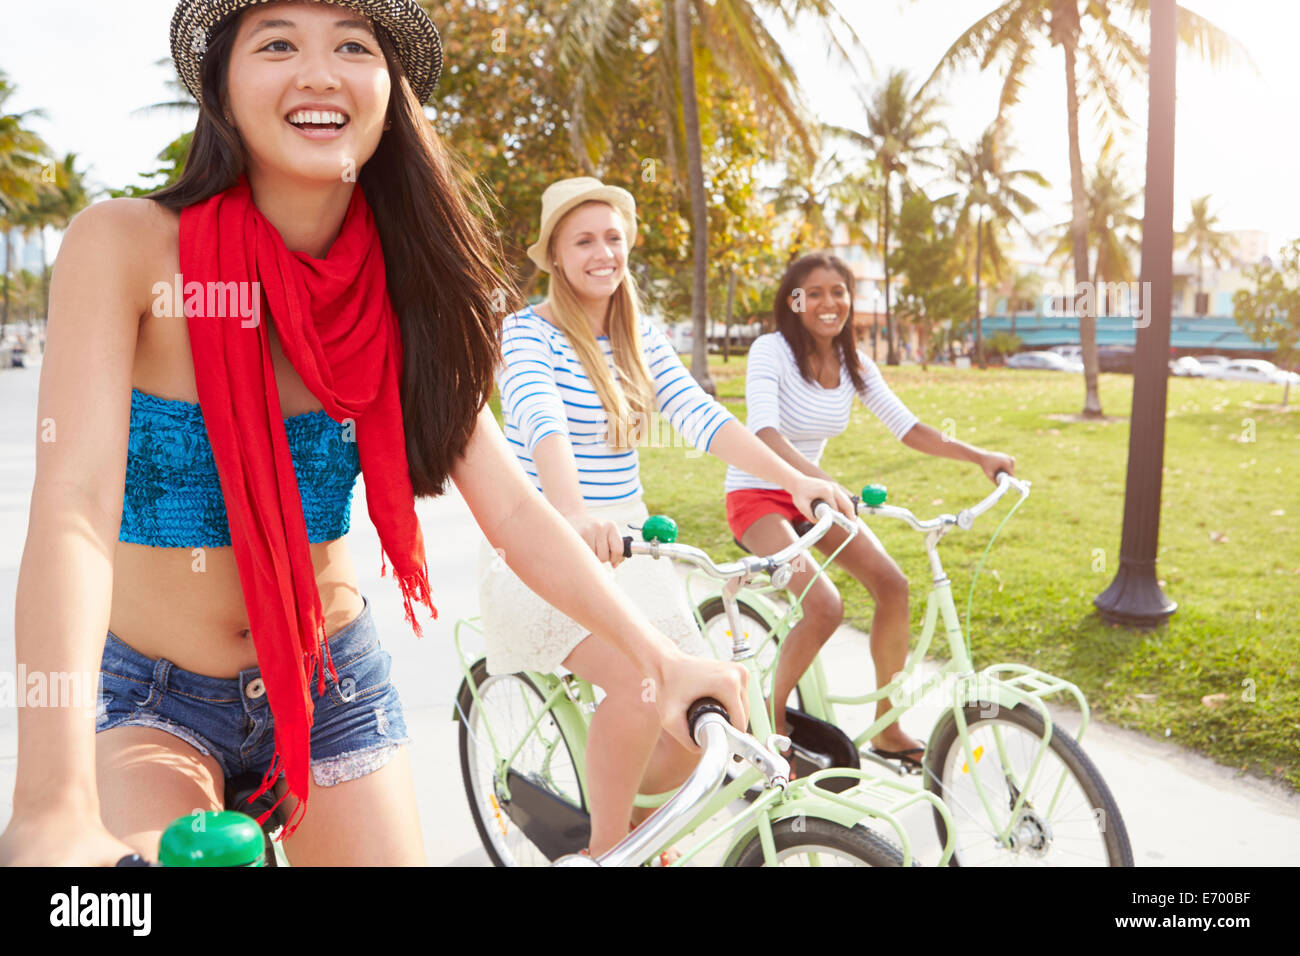 Female Friends Having Fun On Bicycle Ride Stock Photo